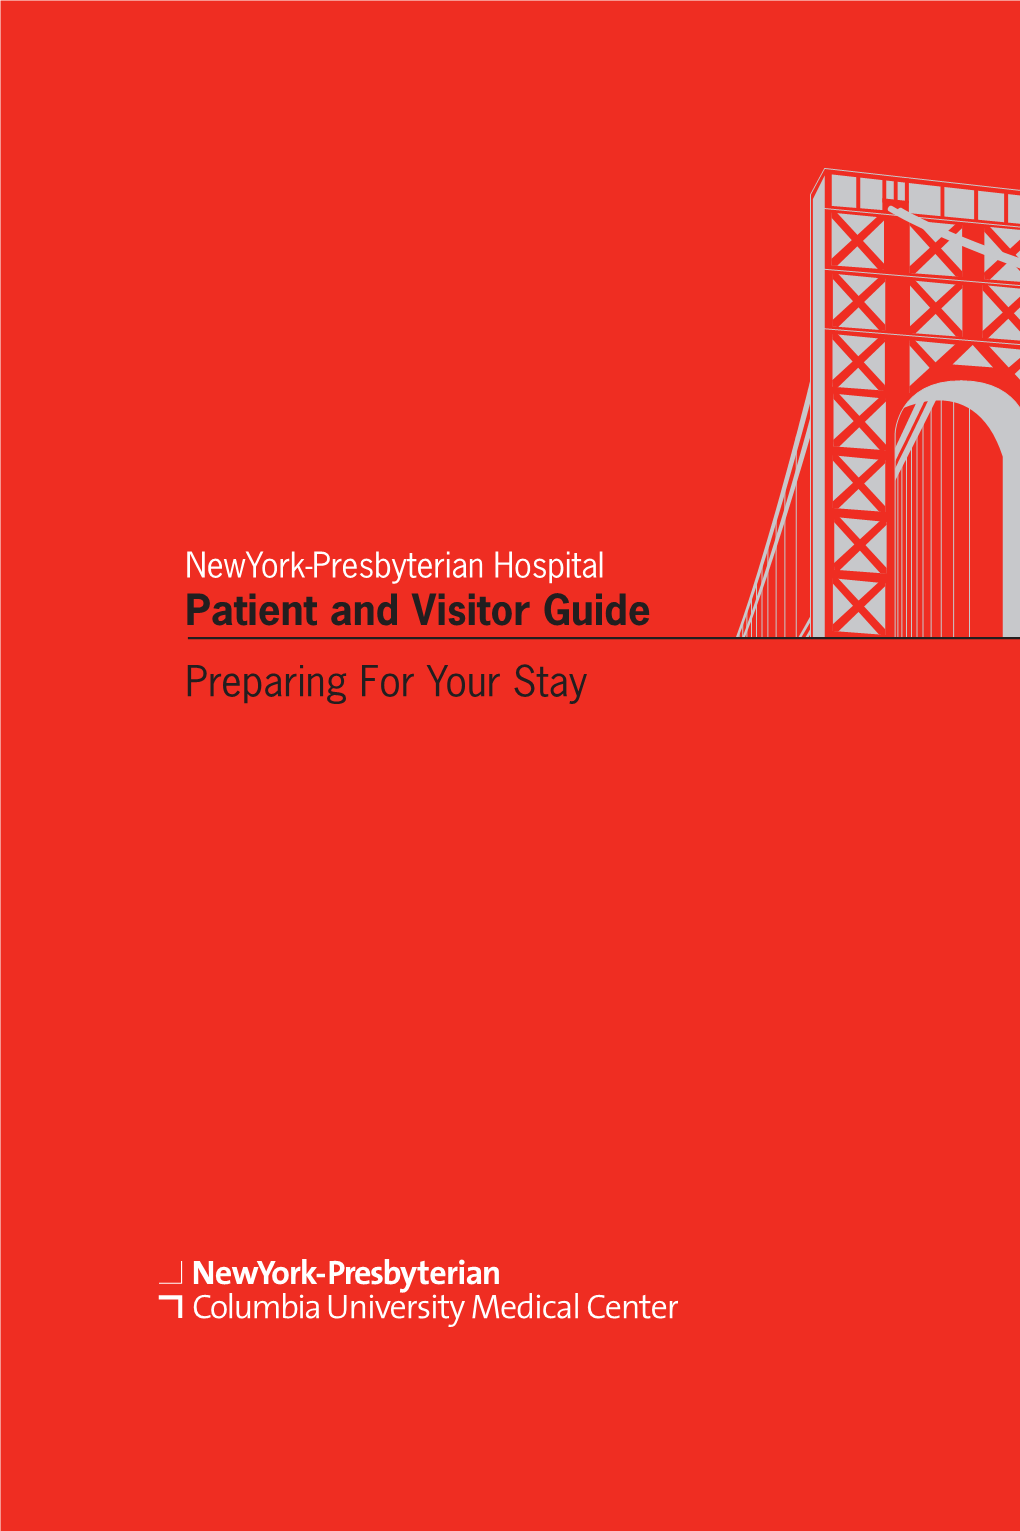 Patient and Visitor Guide Preparing for Your Stay